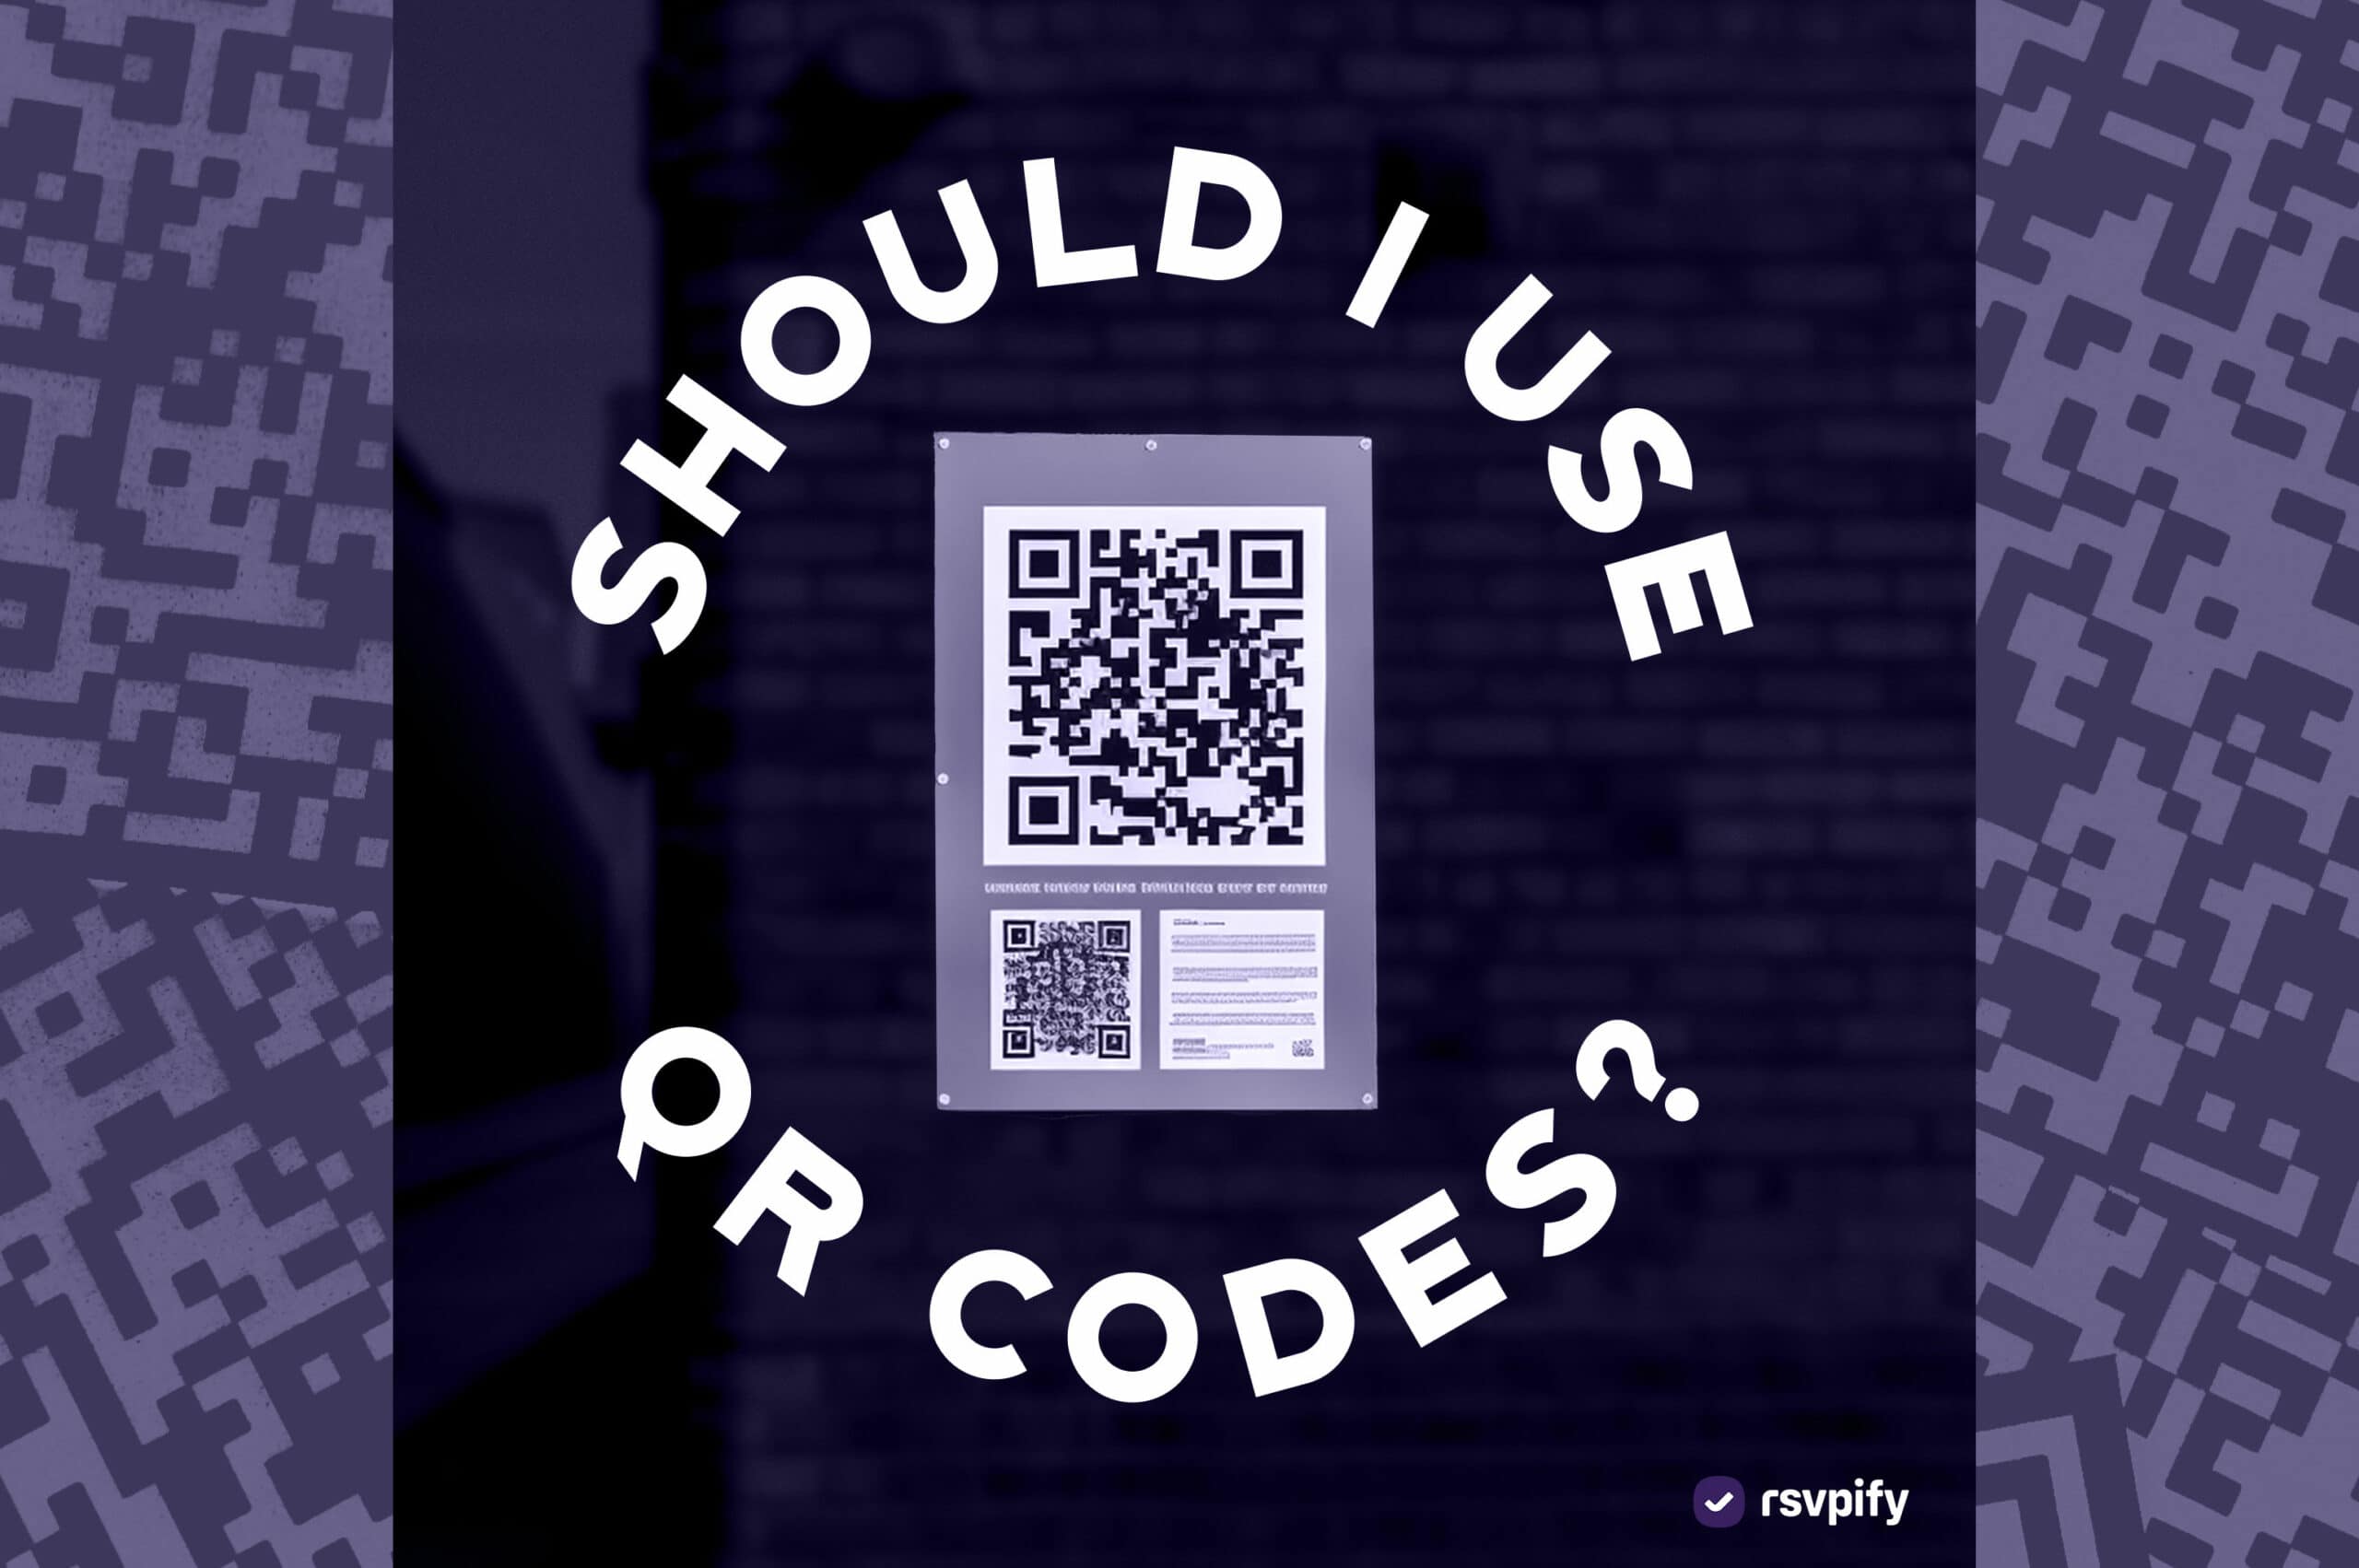 Why should I use a QR code on my flyers?